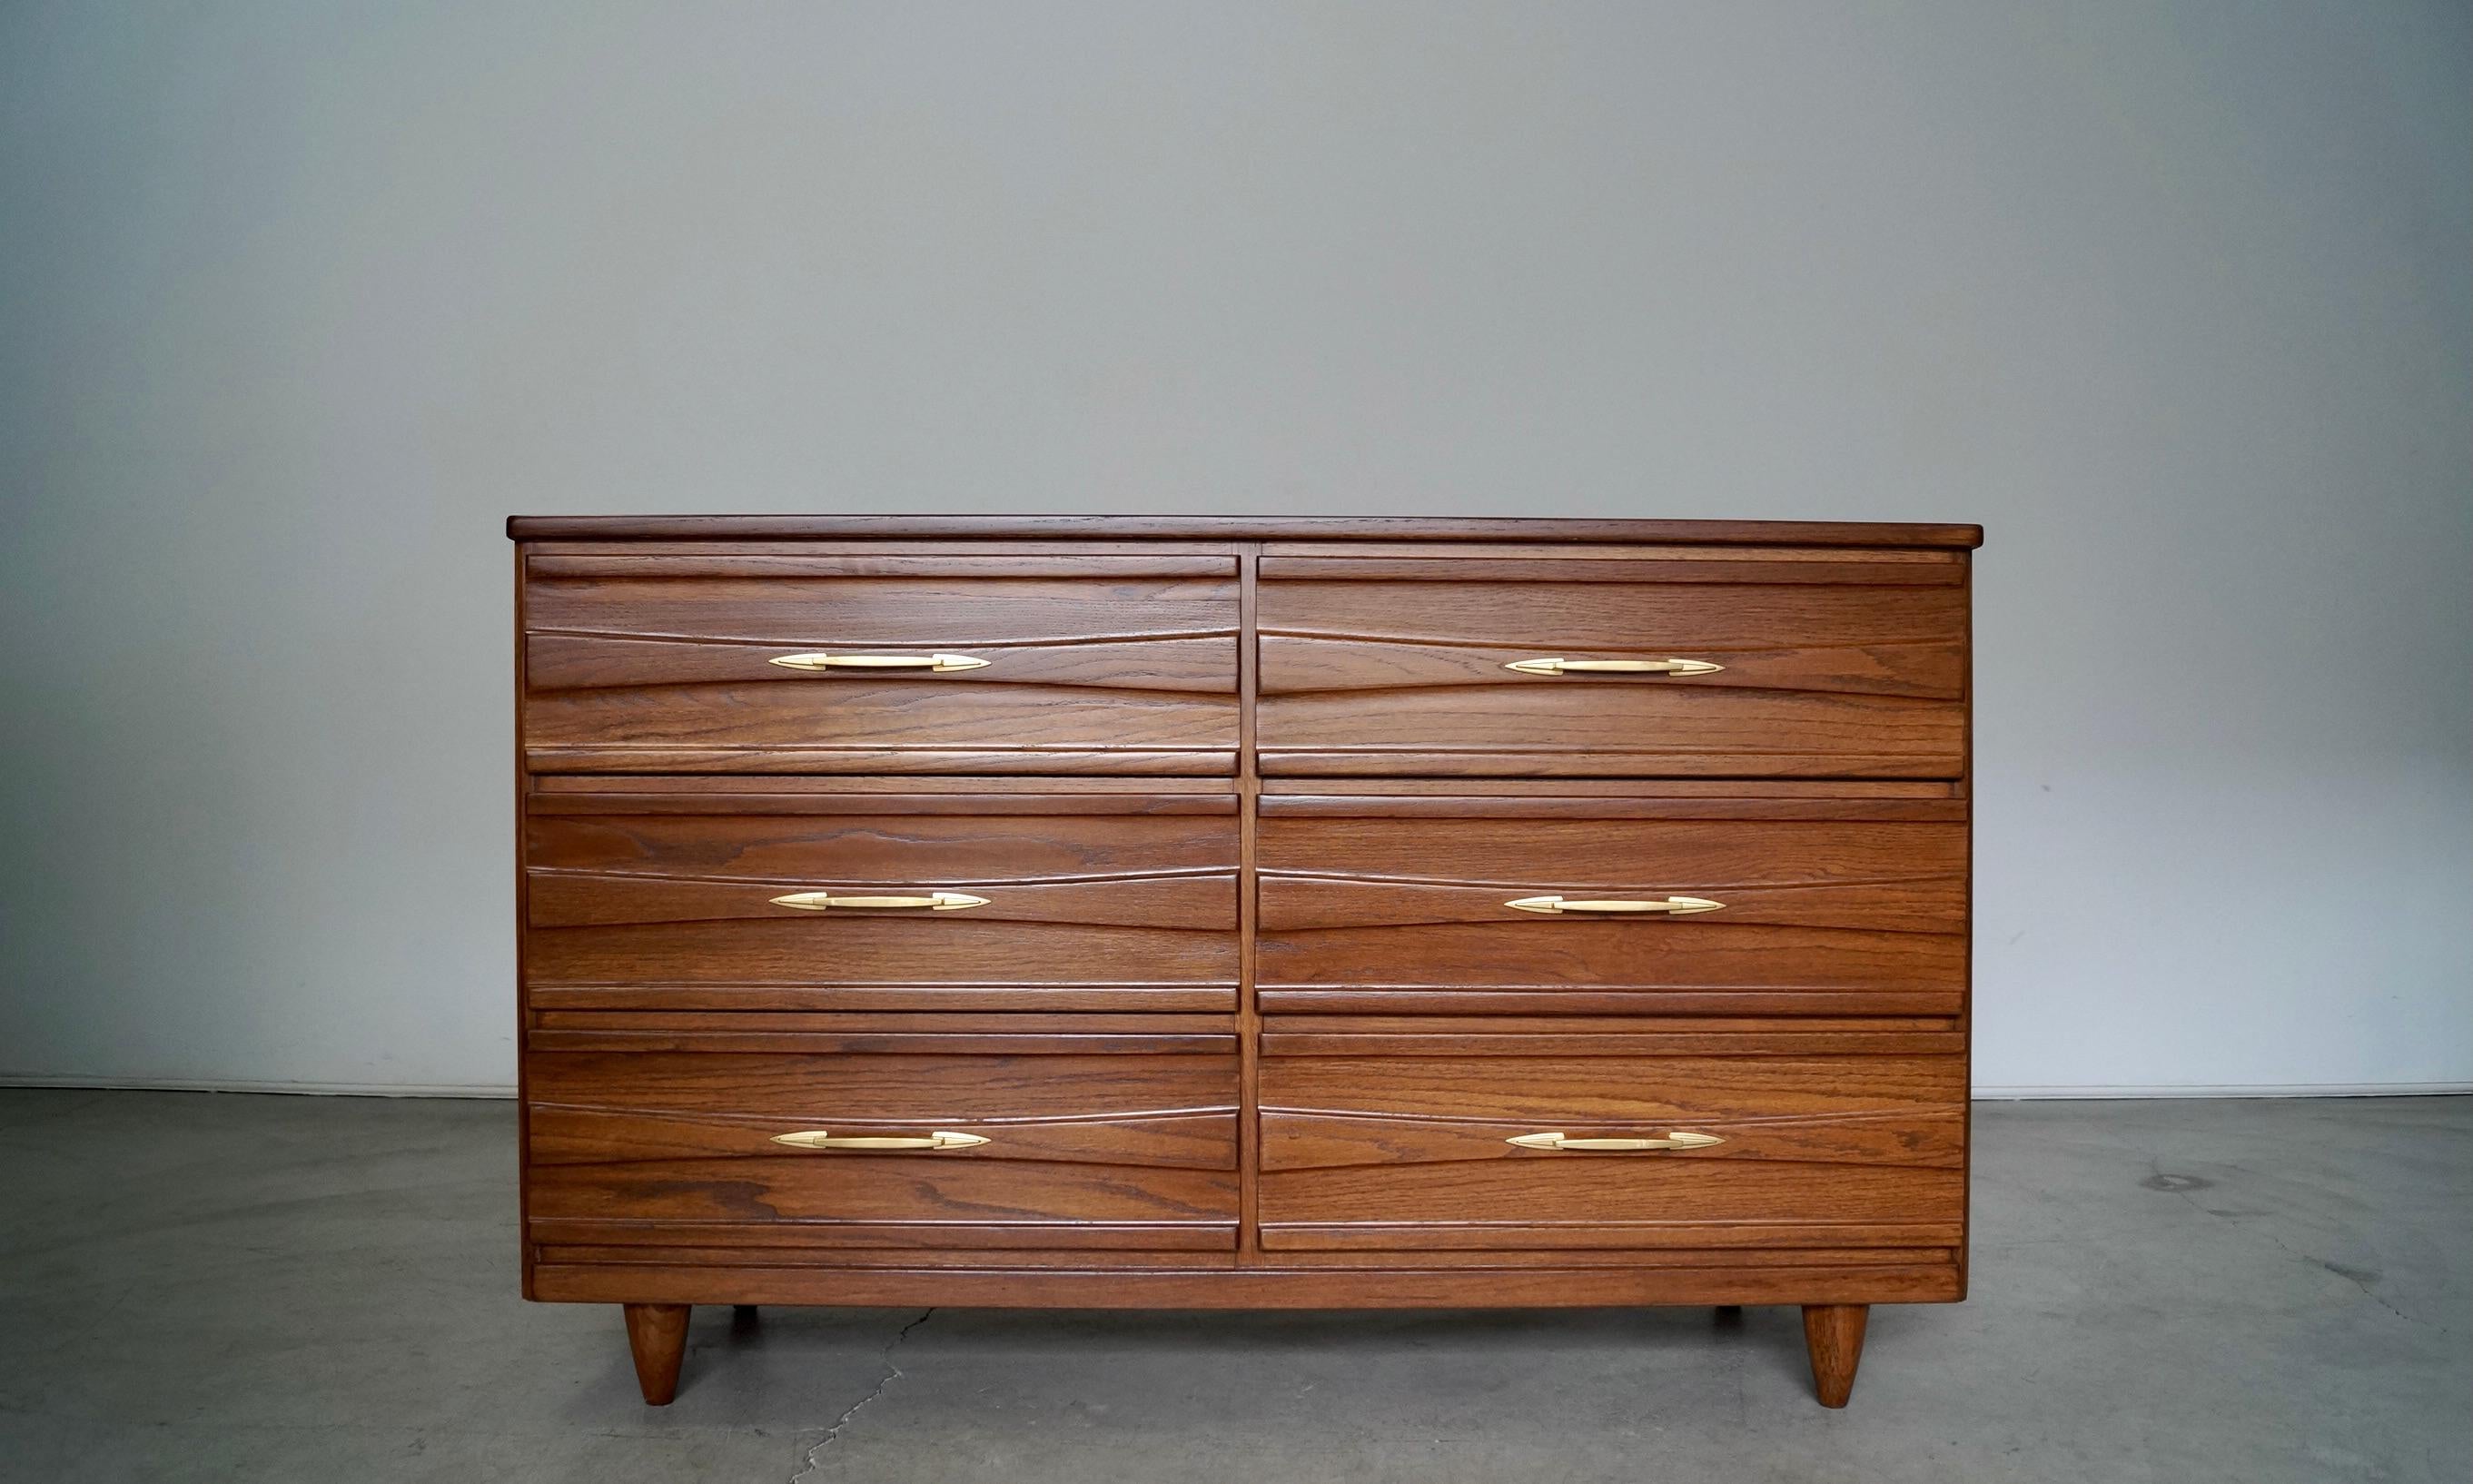 Vintage original Mid-Century Modern dresser for sale. Manufactured in the 1950's, and constructed of solid ash. It has been professionally refinished in walnut, and is a great size. It has six total drawers dovetailed on both ends, and still has the